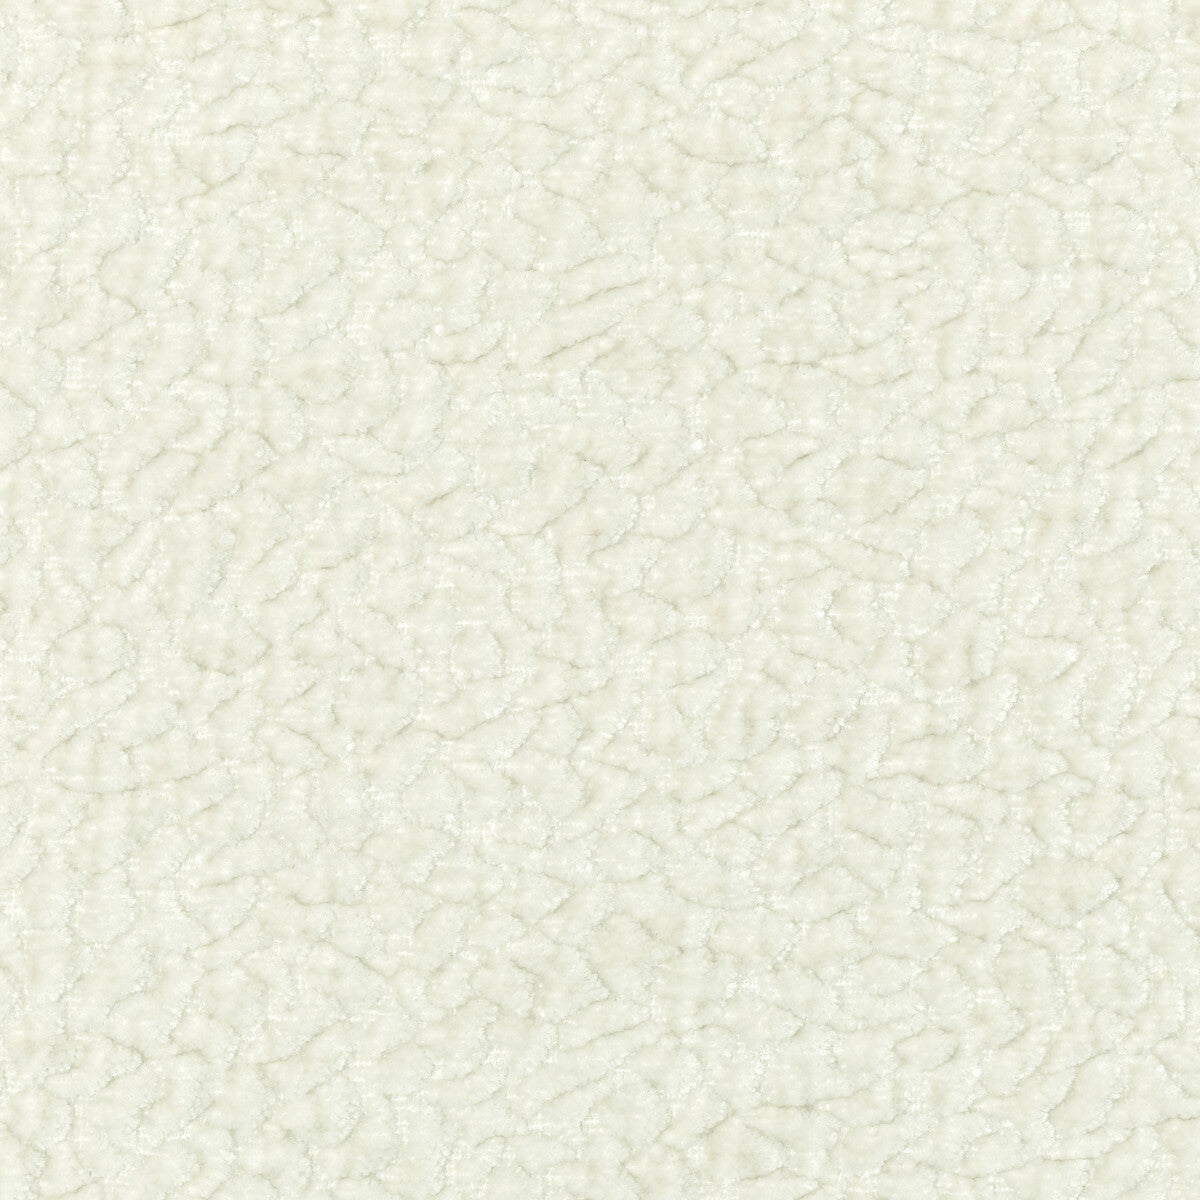 Barton Chenille fabric in cloud color - pattern 36074.101.0 - by Kravet Smart